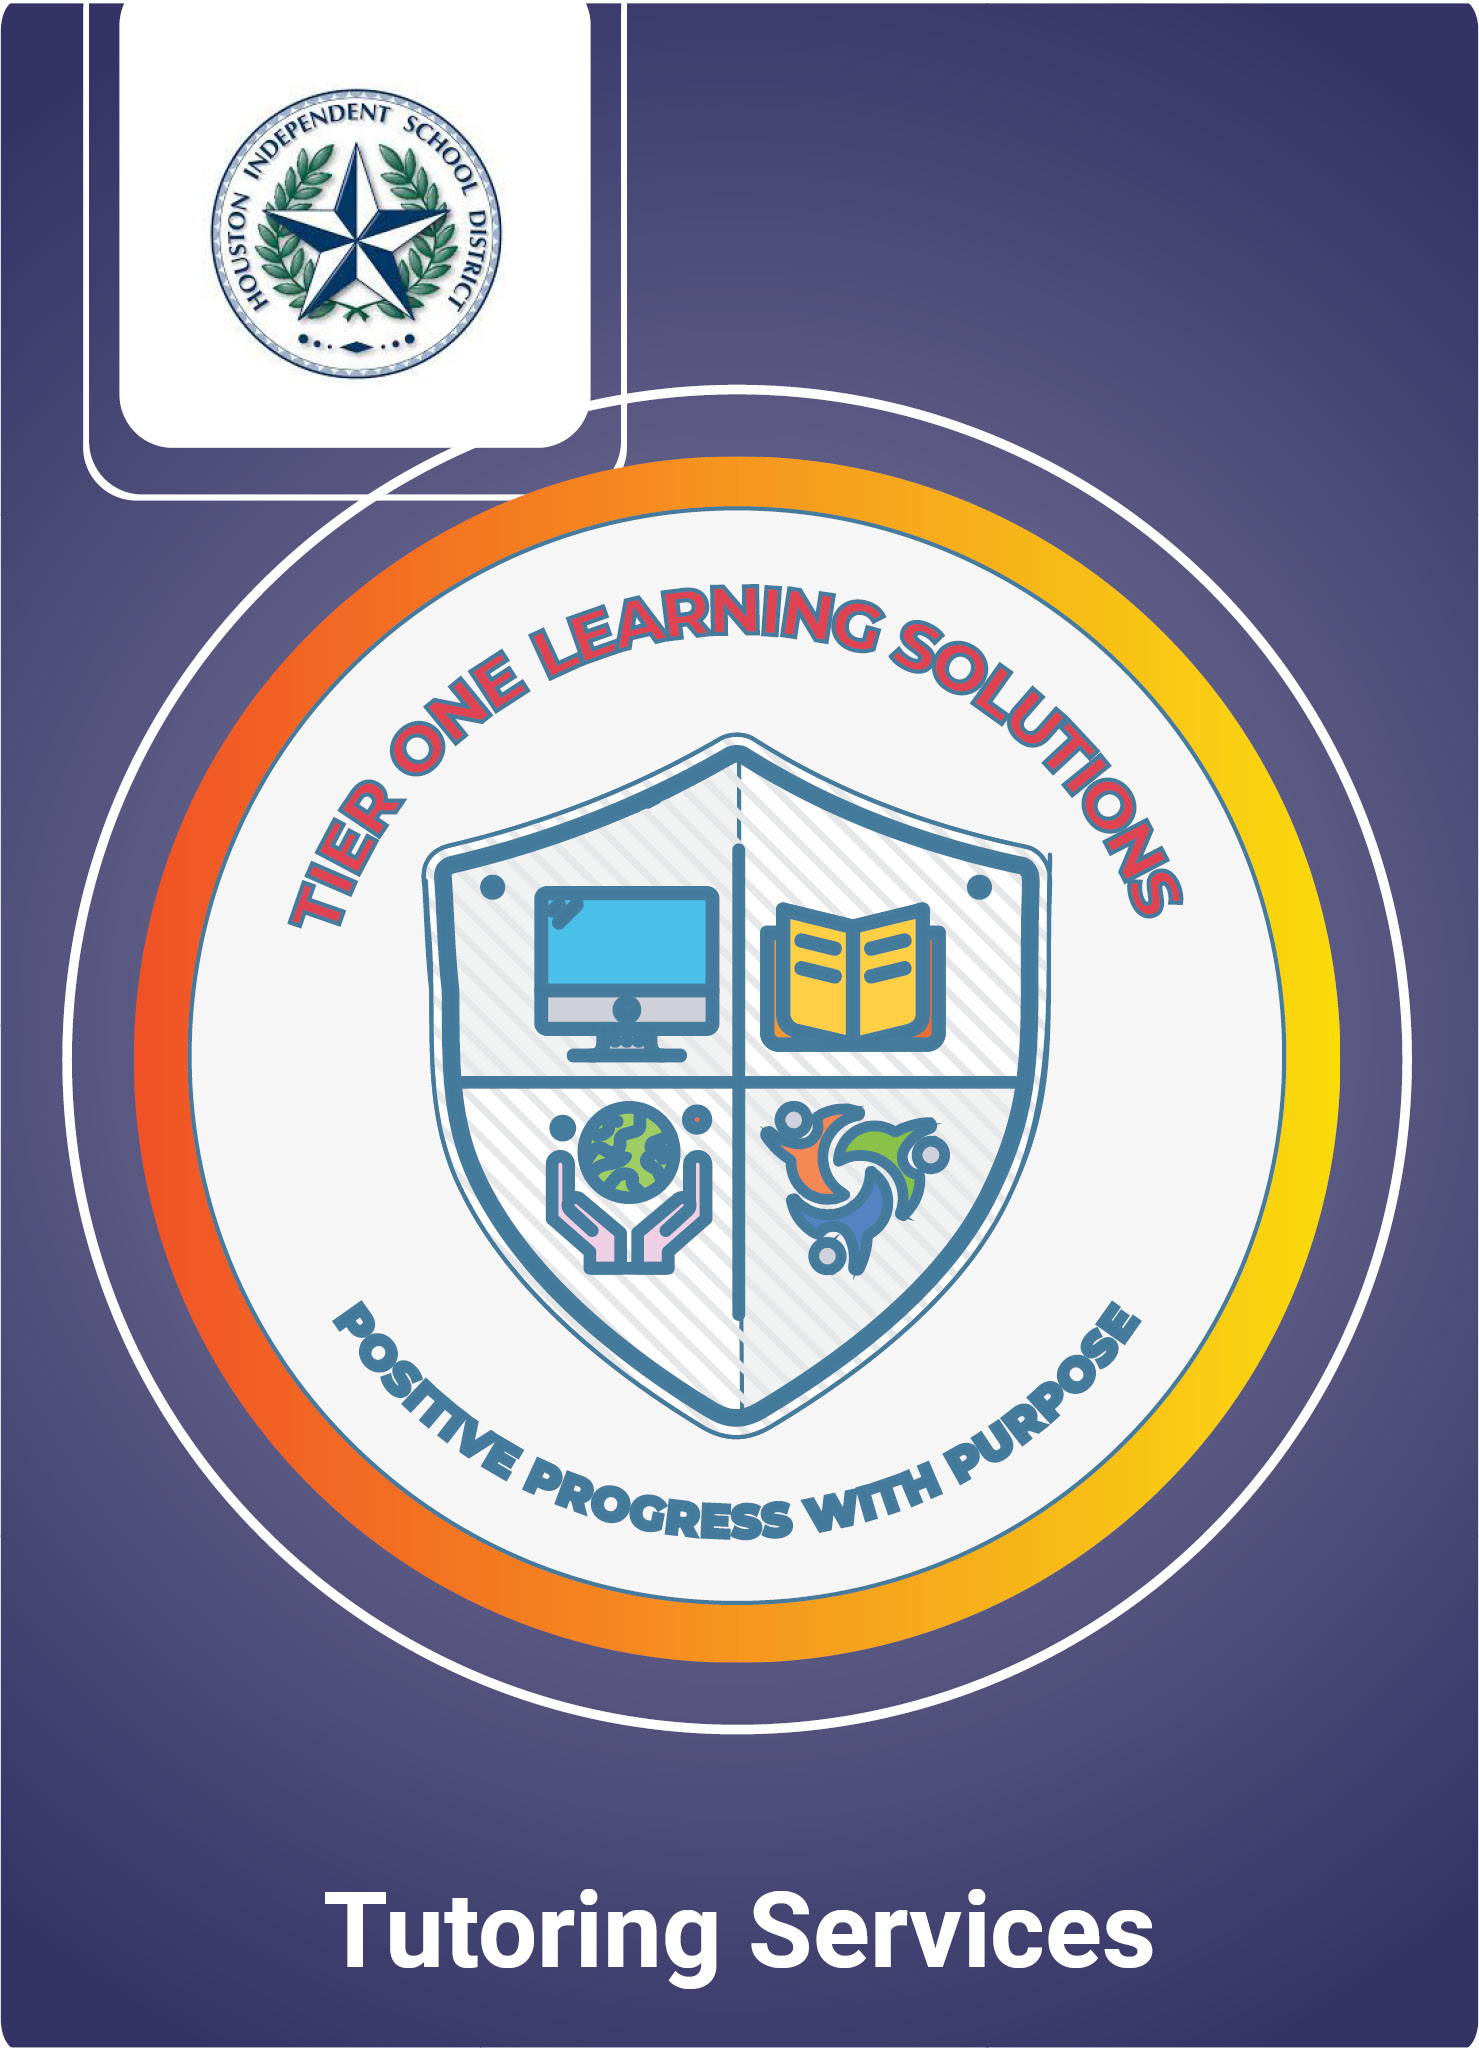 The One Learning Solutions logo